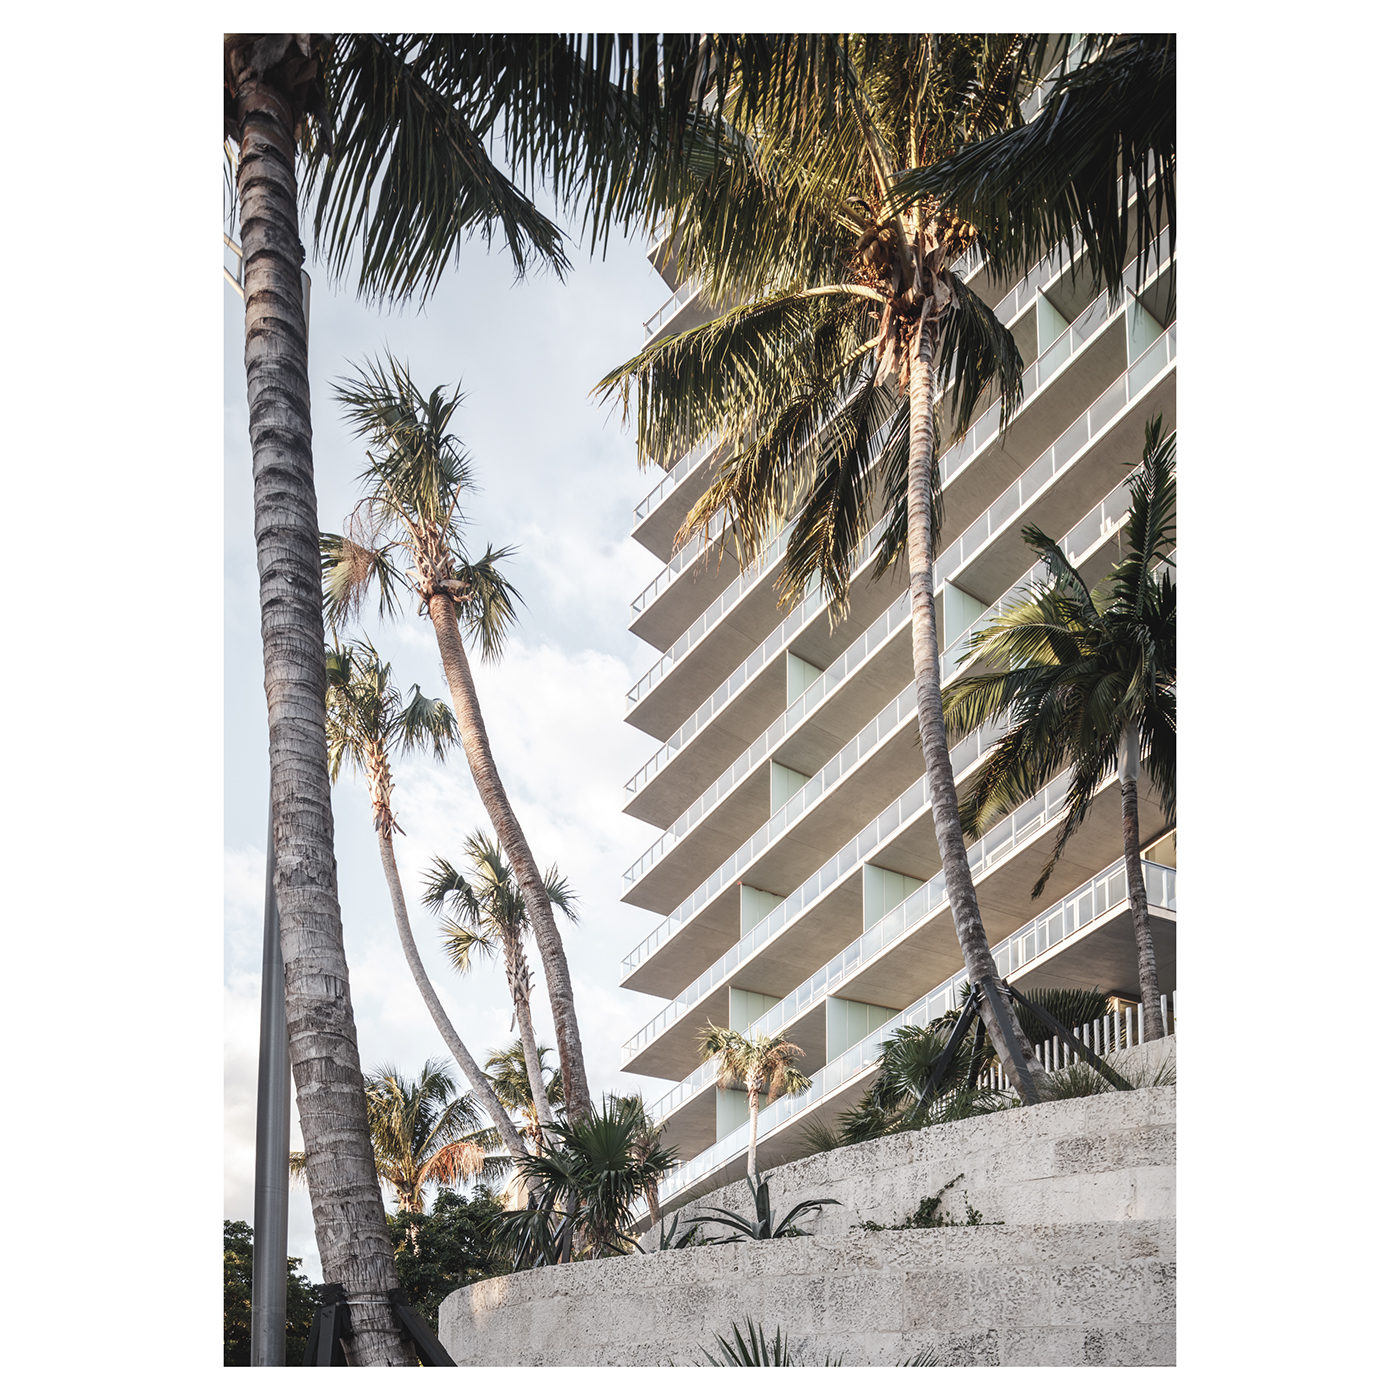 big Bjarke Ingels group miami residential towers architecture design concrete